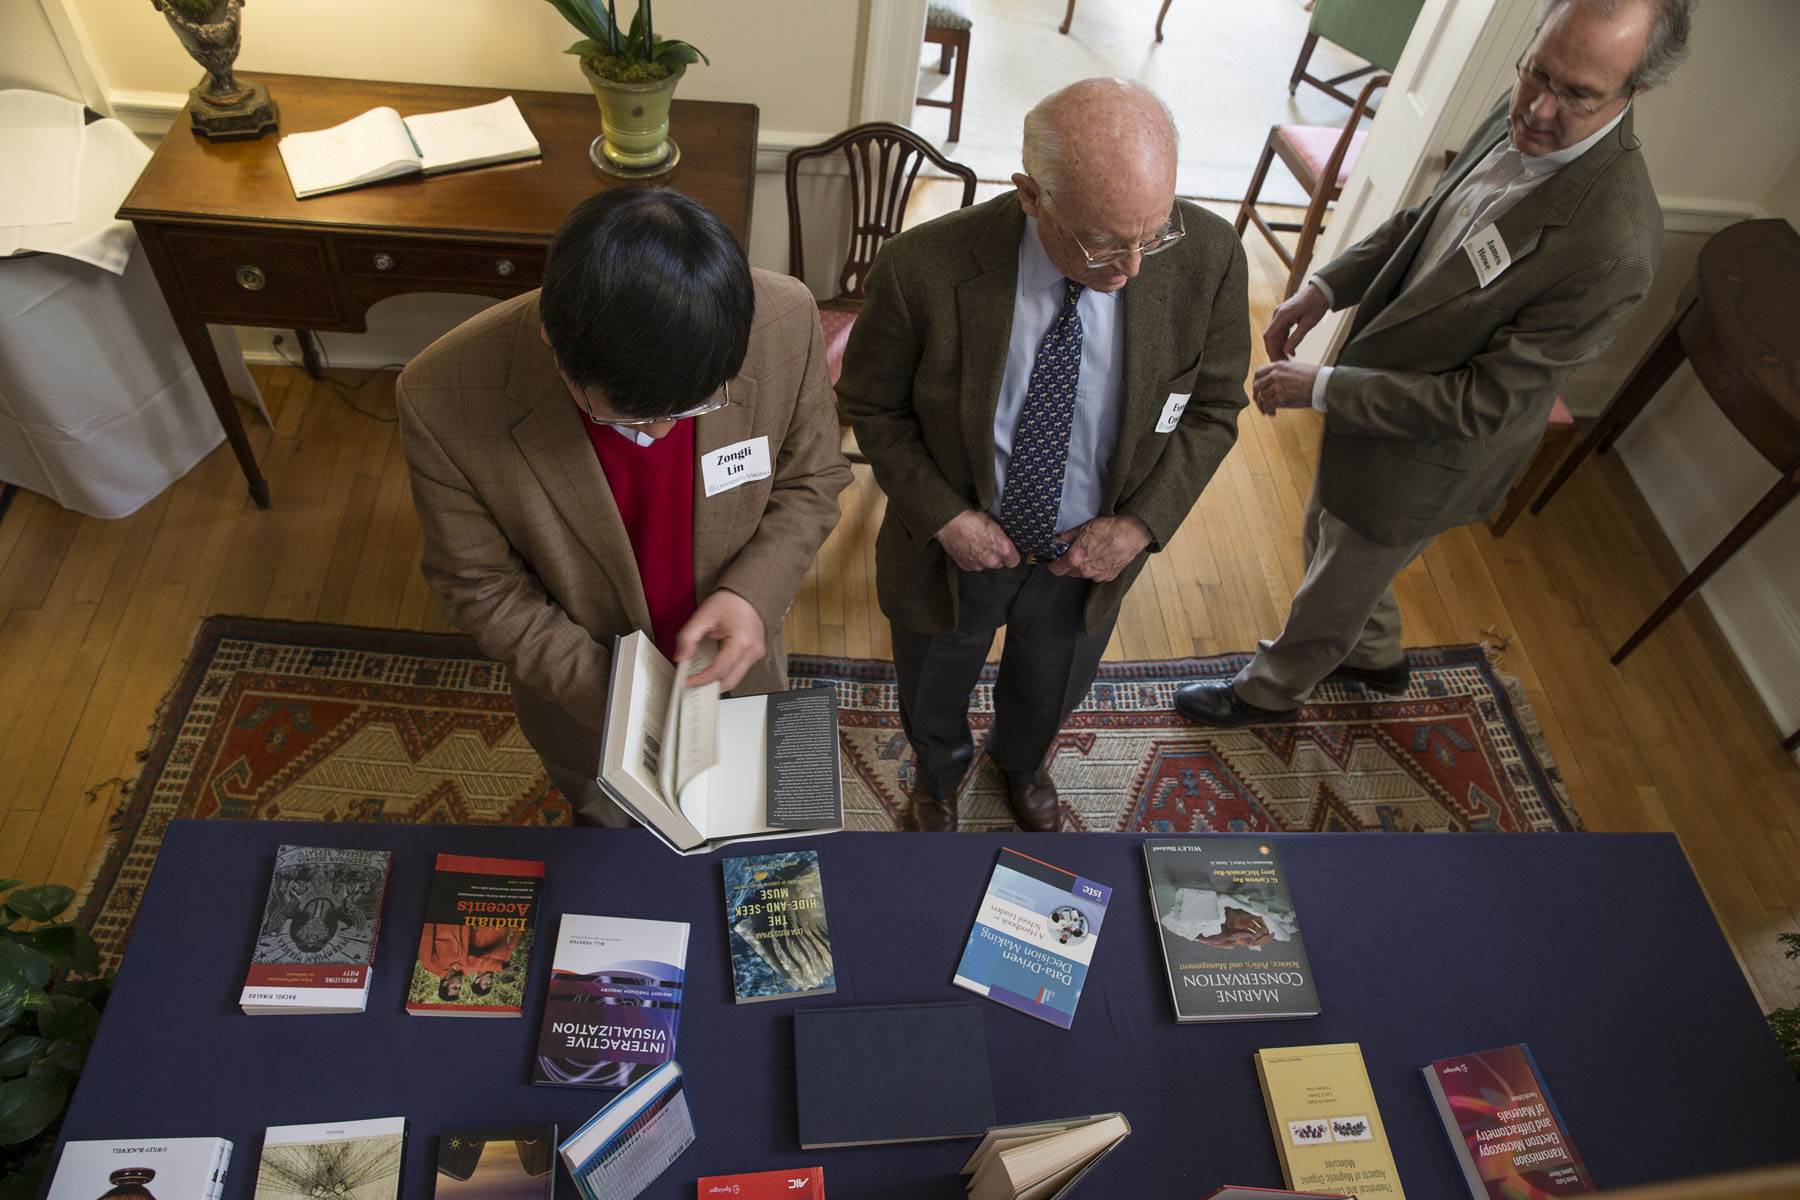 Professors looking at books on a table